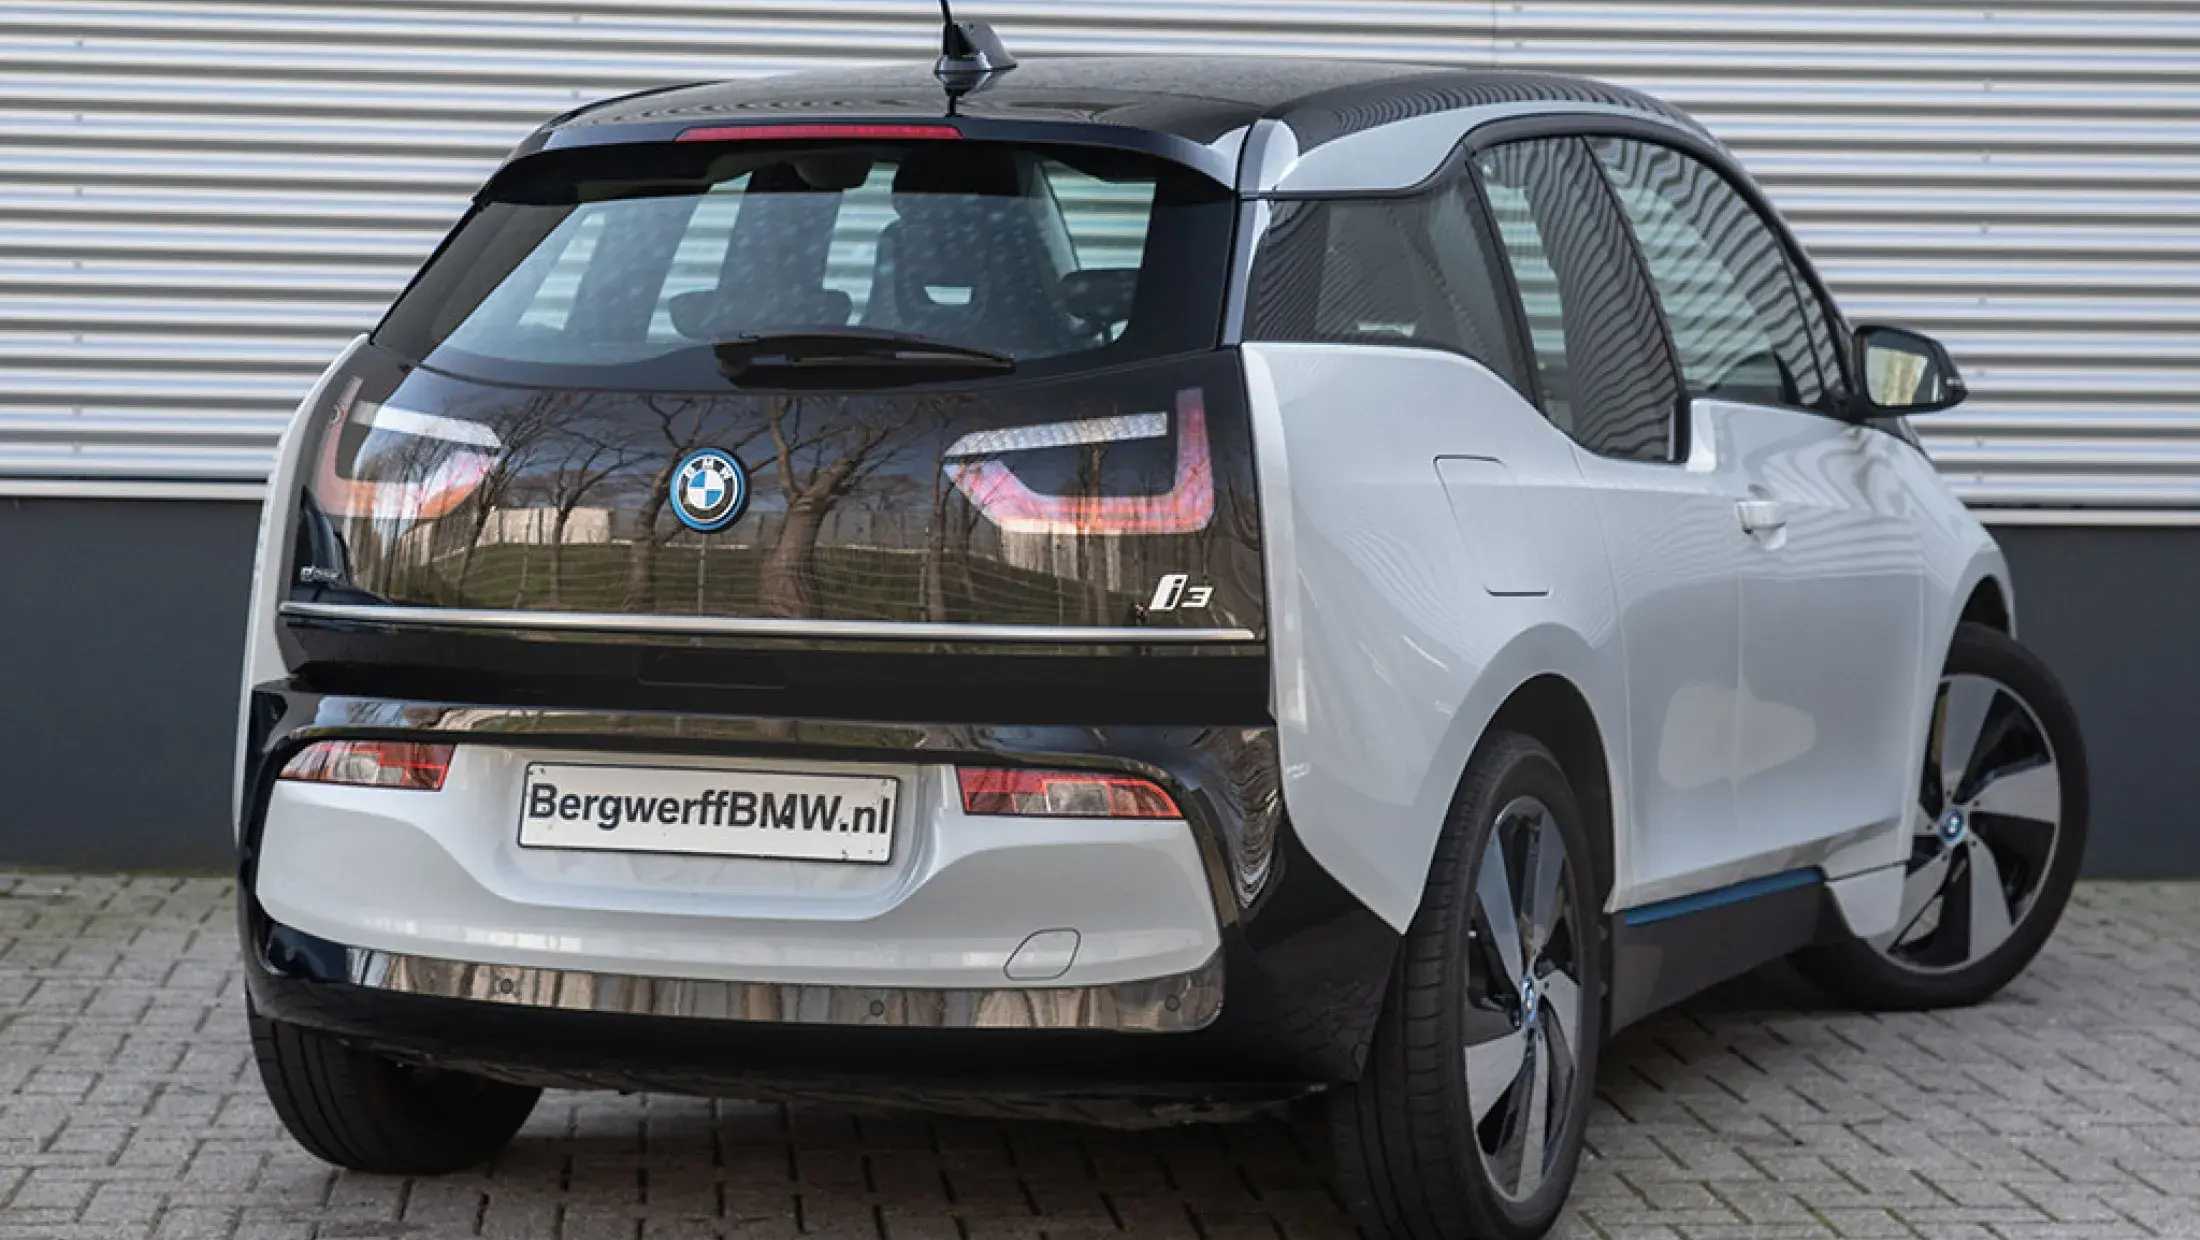 BMW i3 120Ah Driving Assistant Plus Capparisweiss I01 Bergwerff